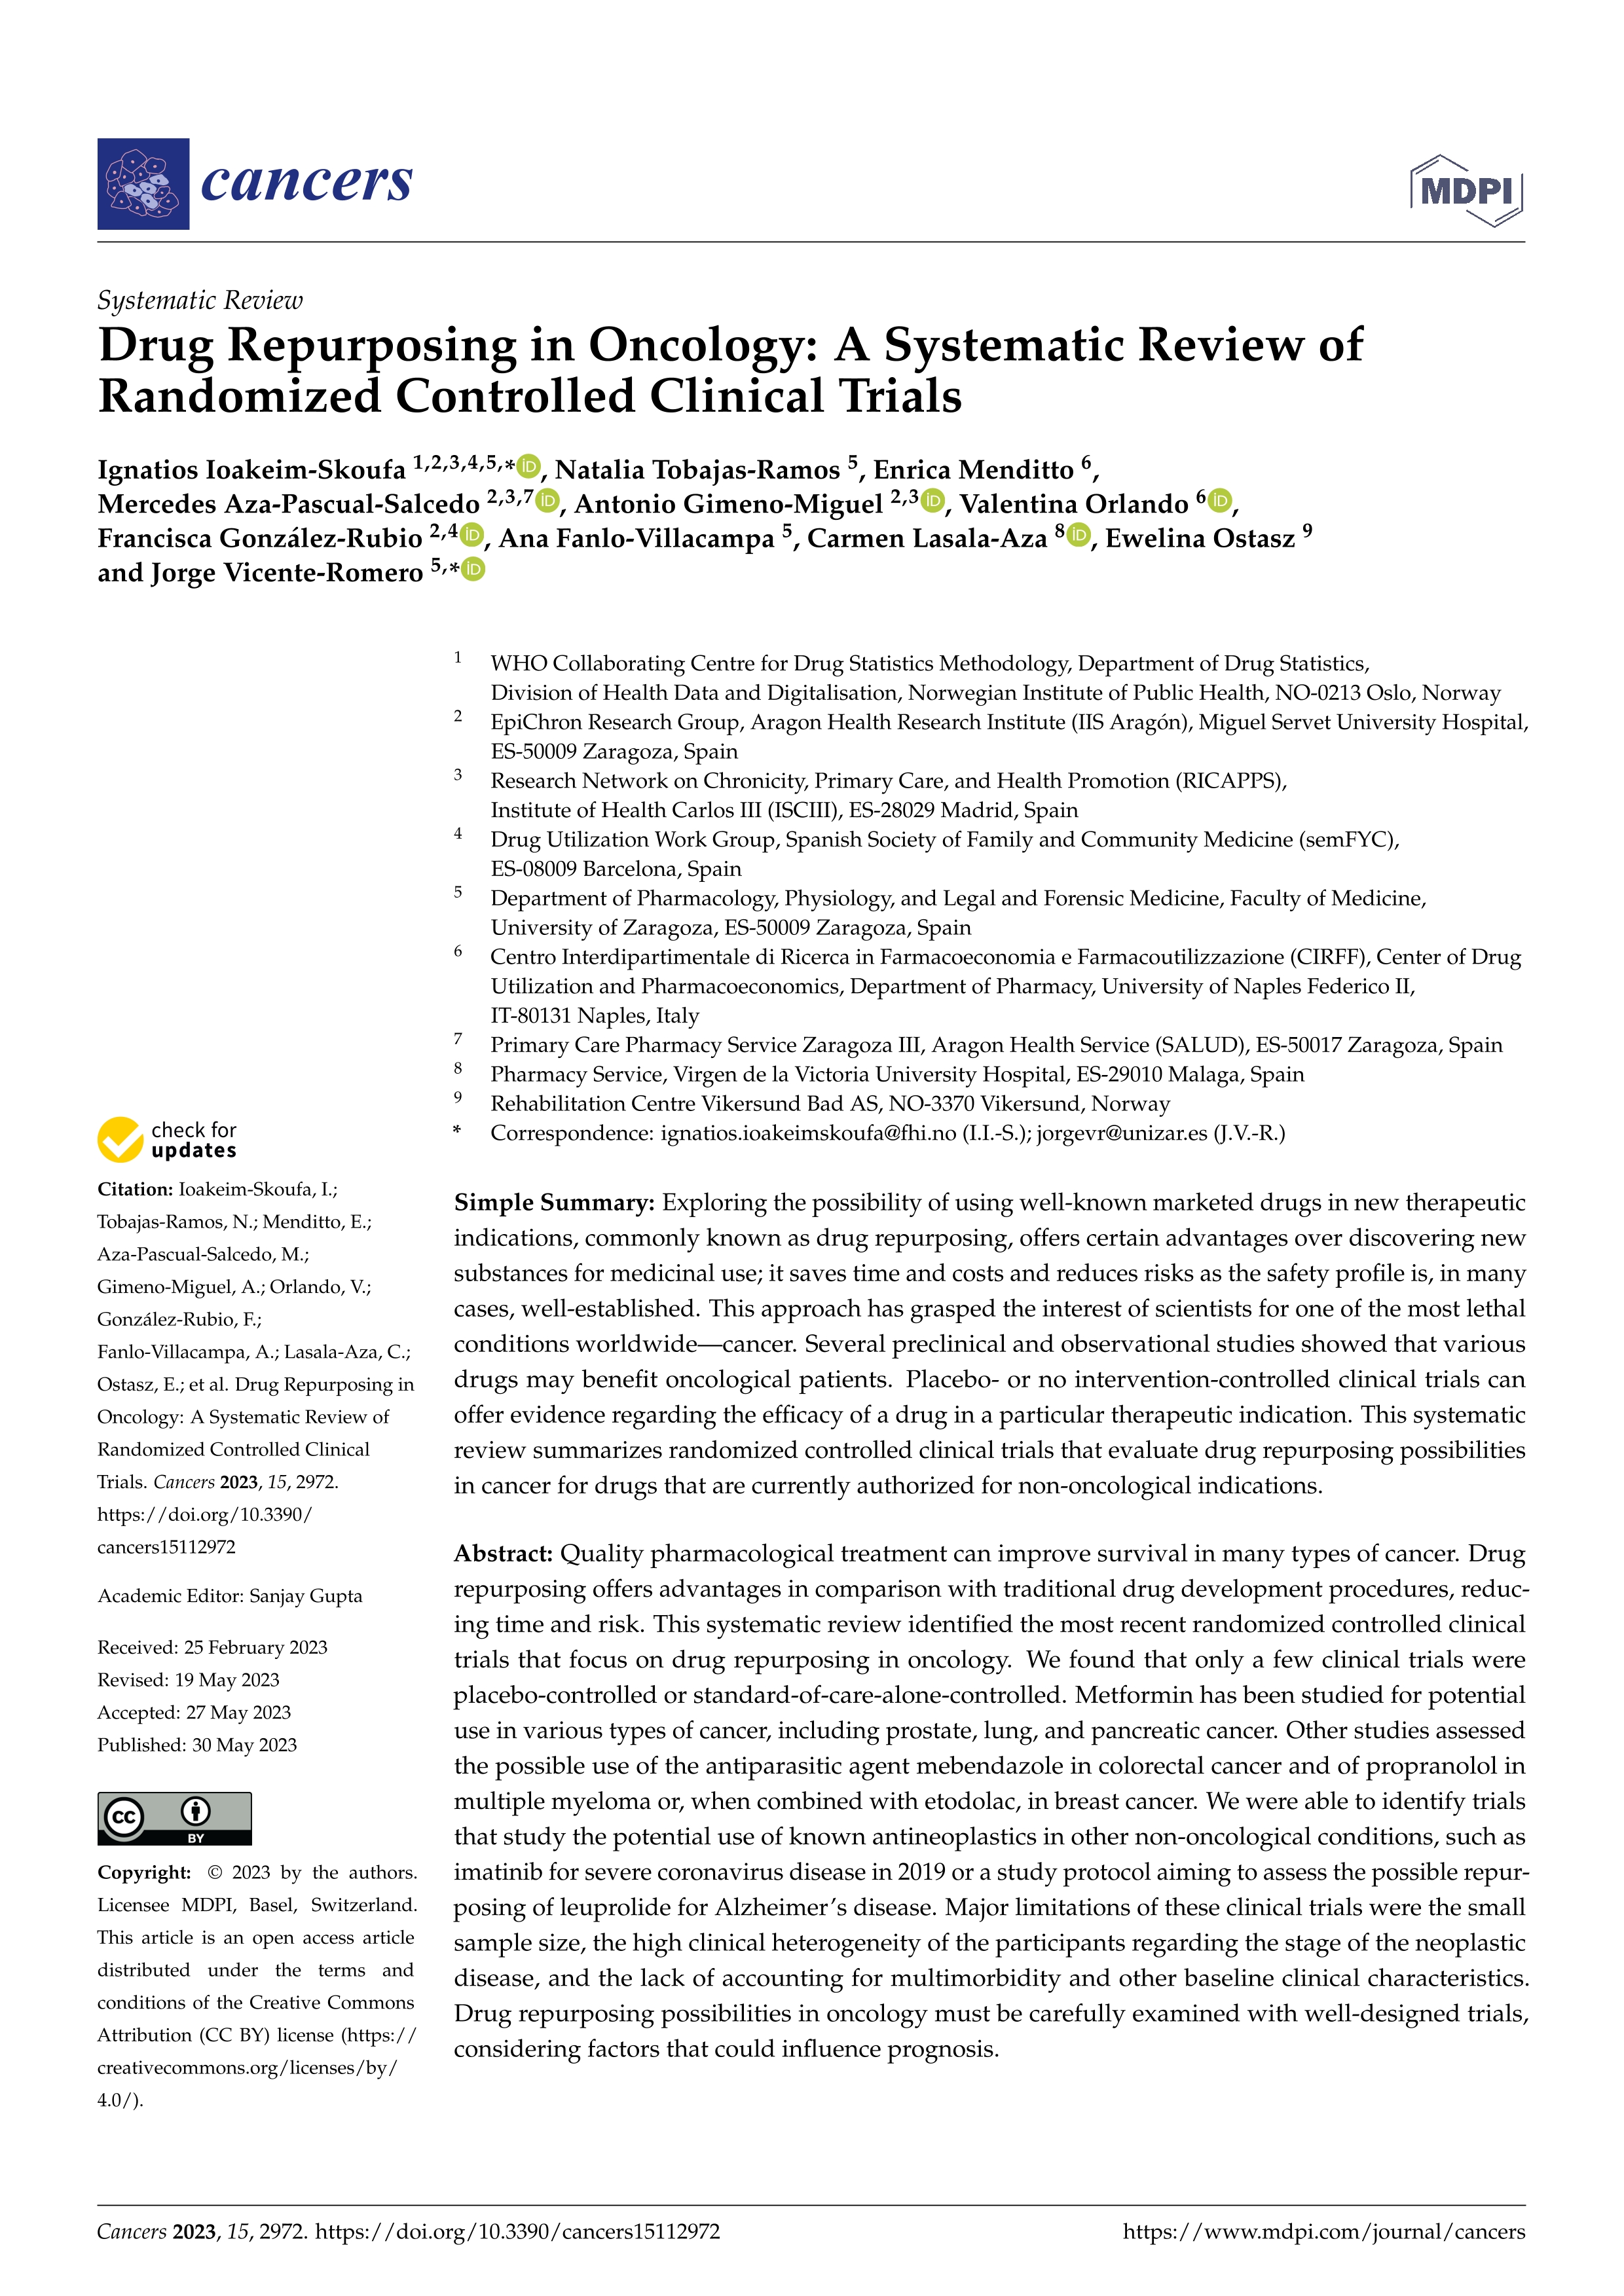 Drug repurposing in oncology: a systematic review of randomized controlled clinical trials